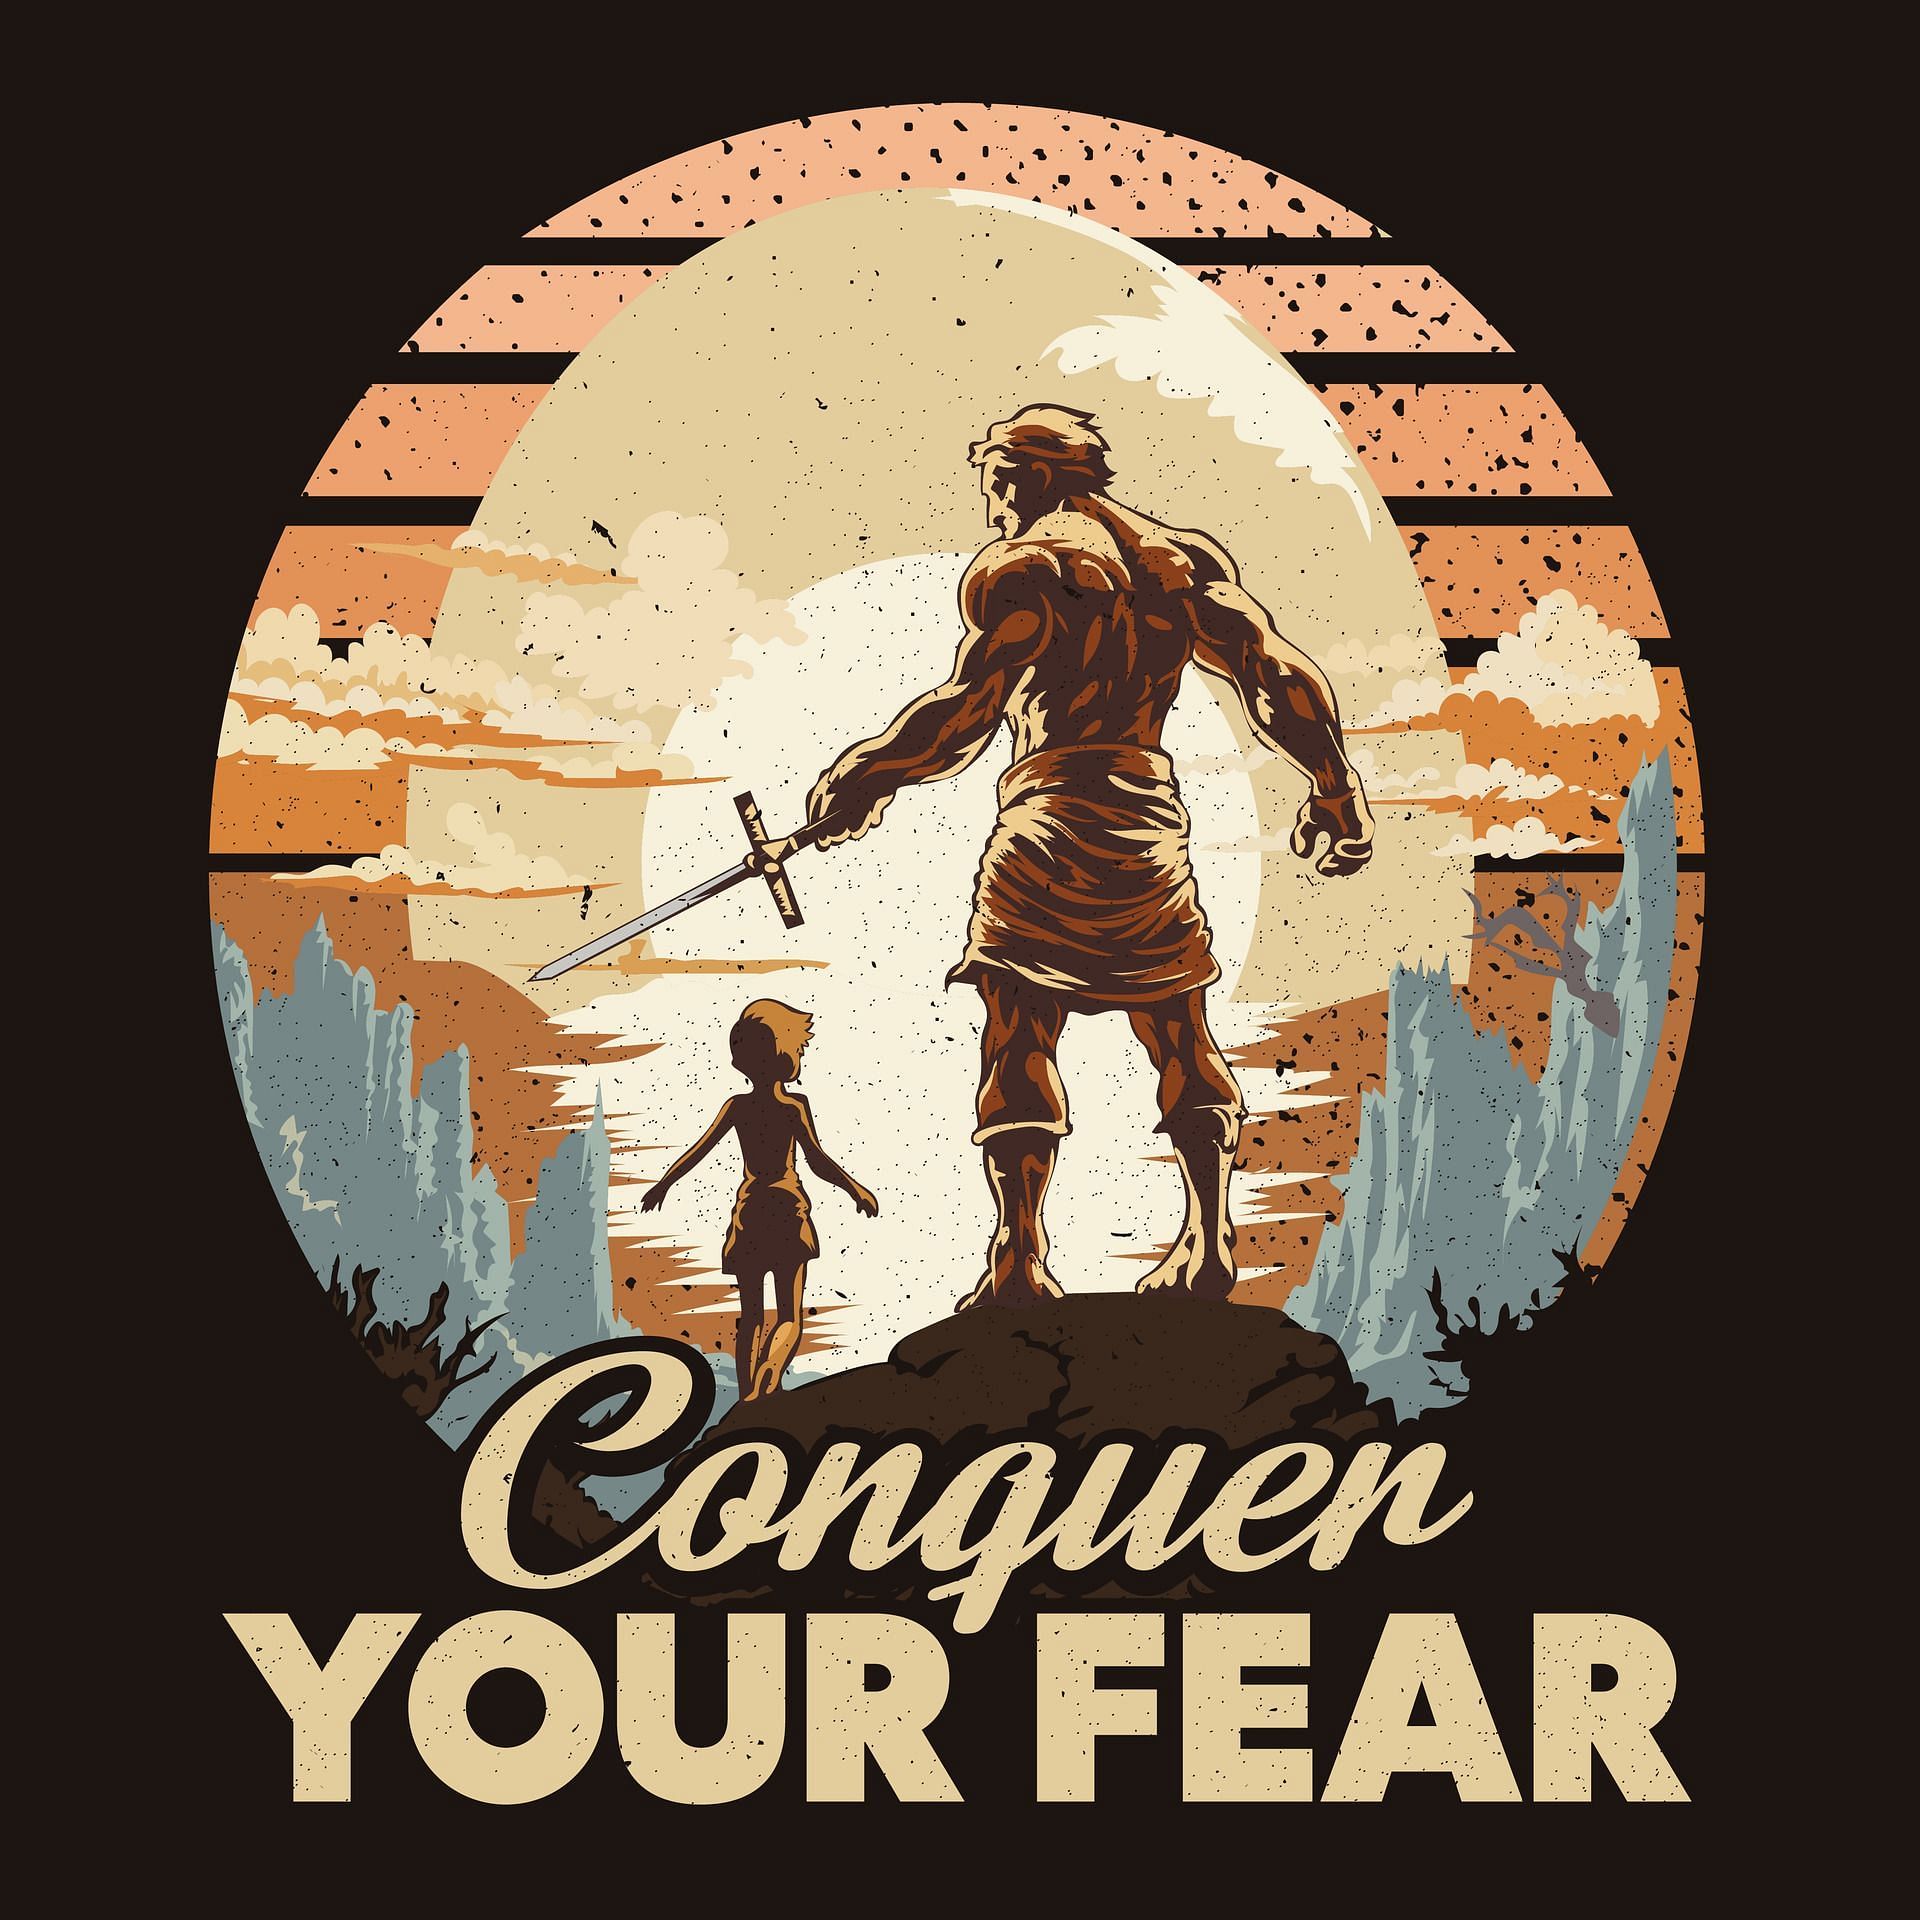 We can conquer our fears, one step at a time. (Image via Vecteezy/ Teras Universe)